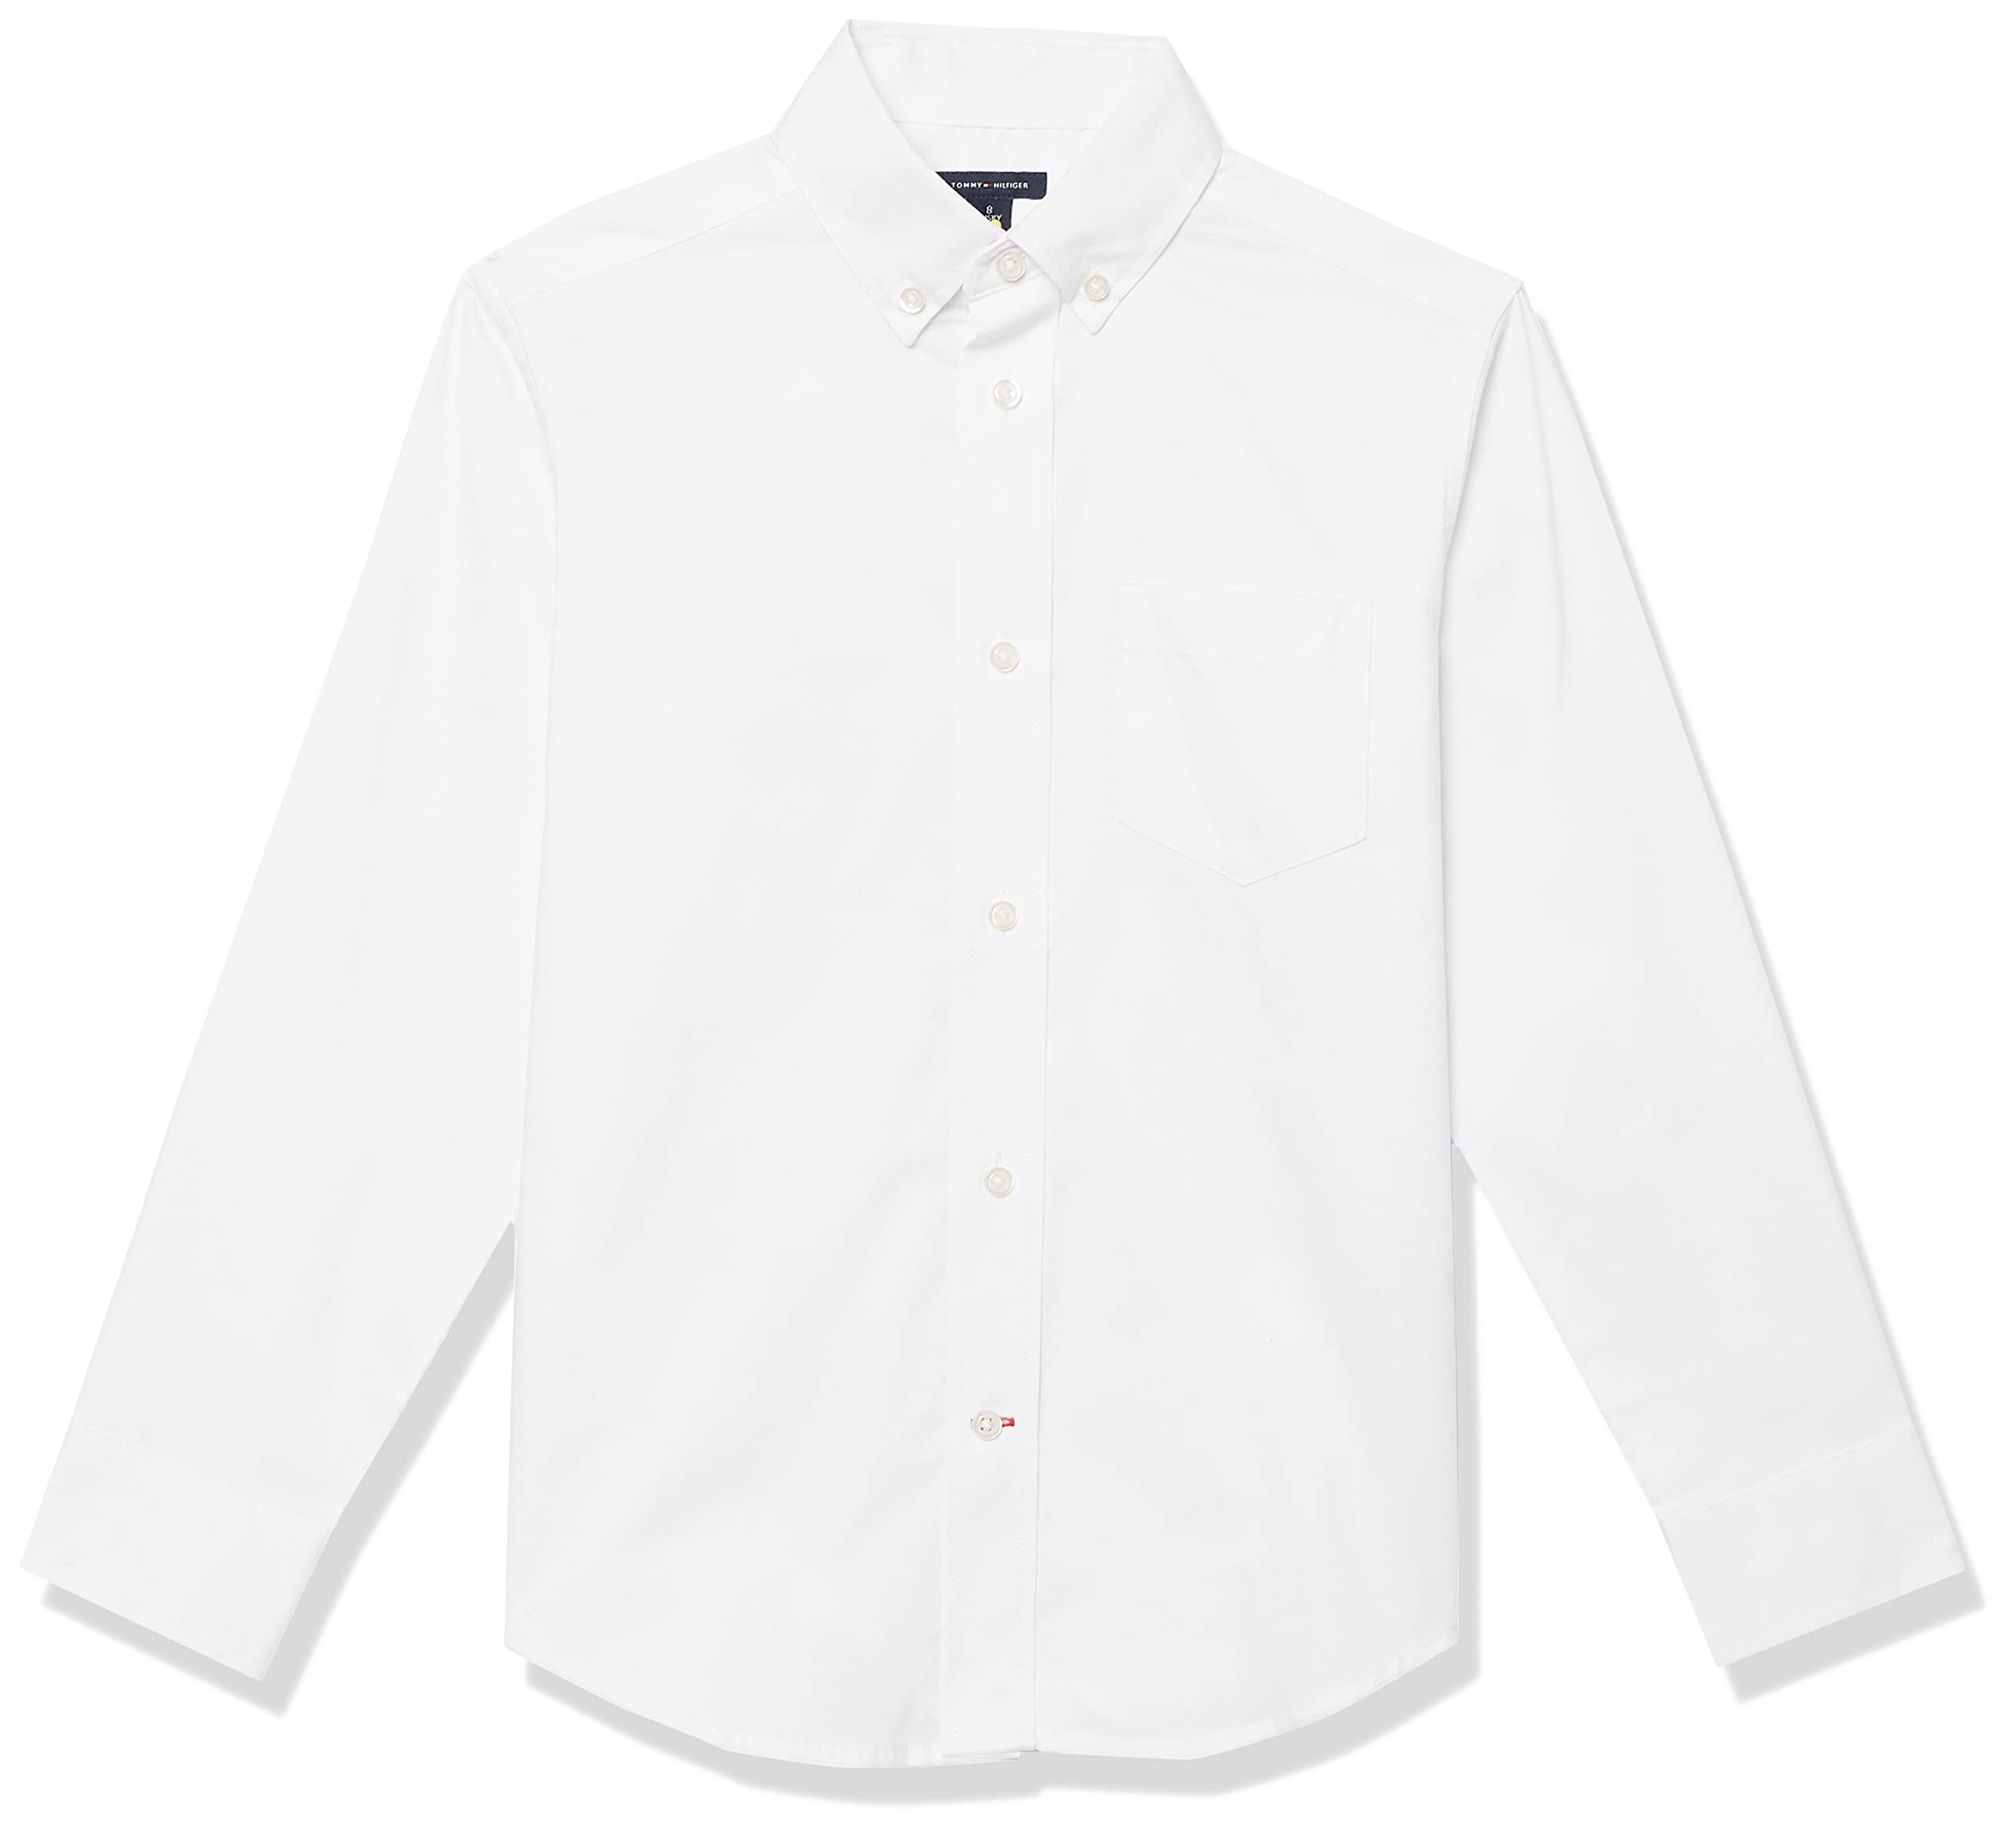 Tommy Hilfiger Boys Oxford Long Sleeve Dress Shirt, Collared Button-Down with Chest Pocket, Regular Fit